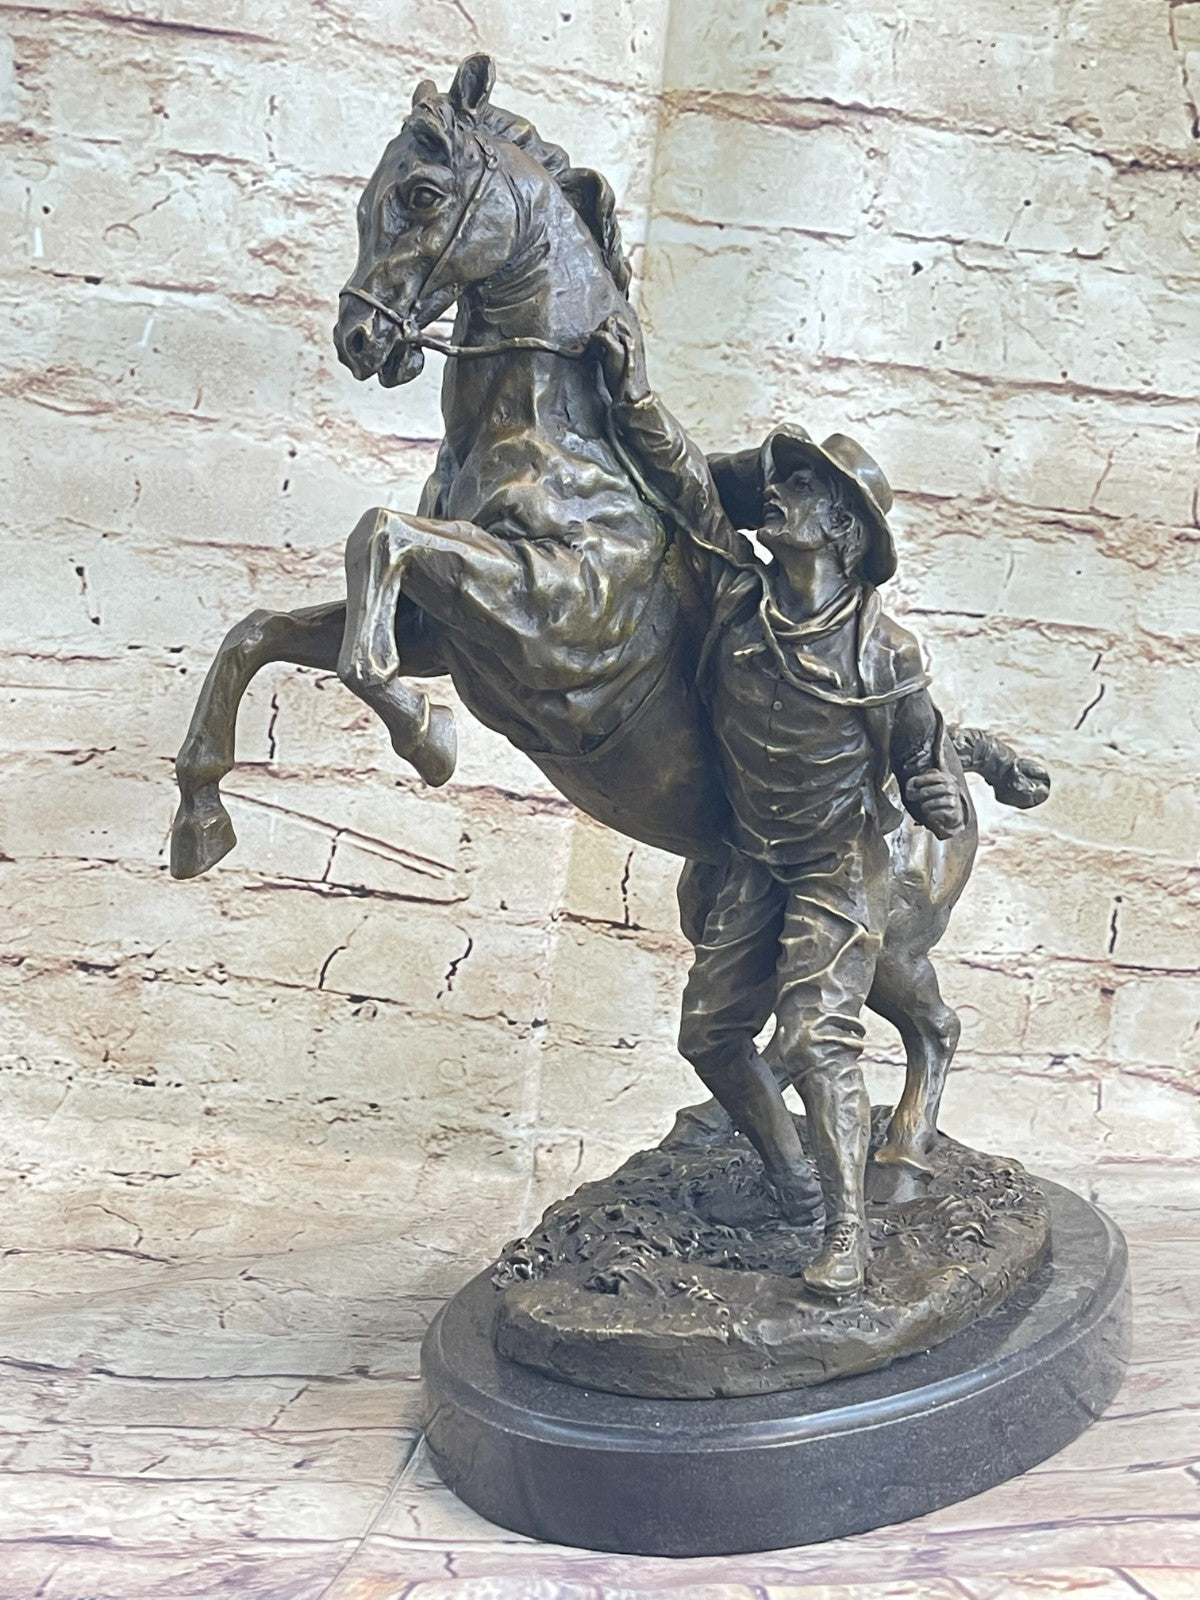 Handcrafted Old Man Taming a Wild Horse Museum Quality Bronze Sculpture Figurine